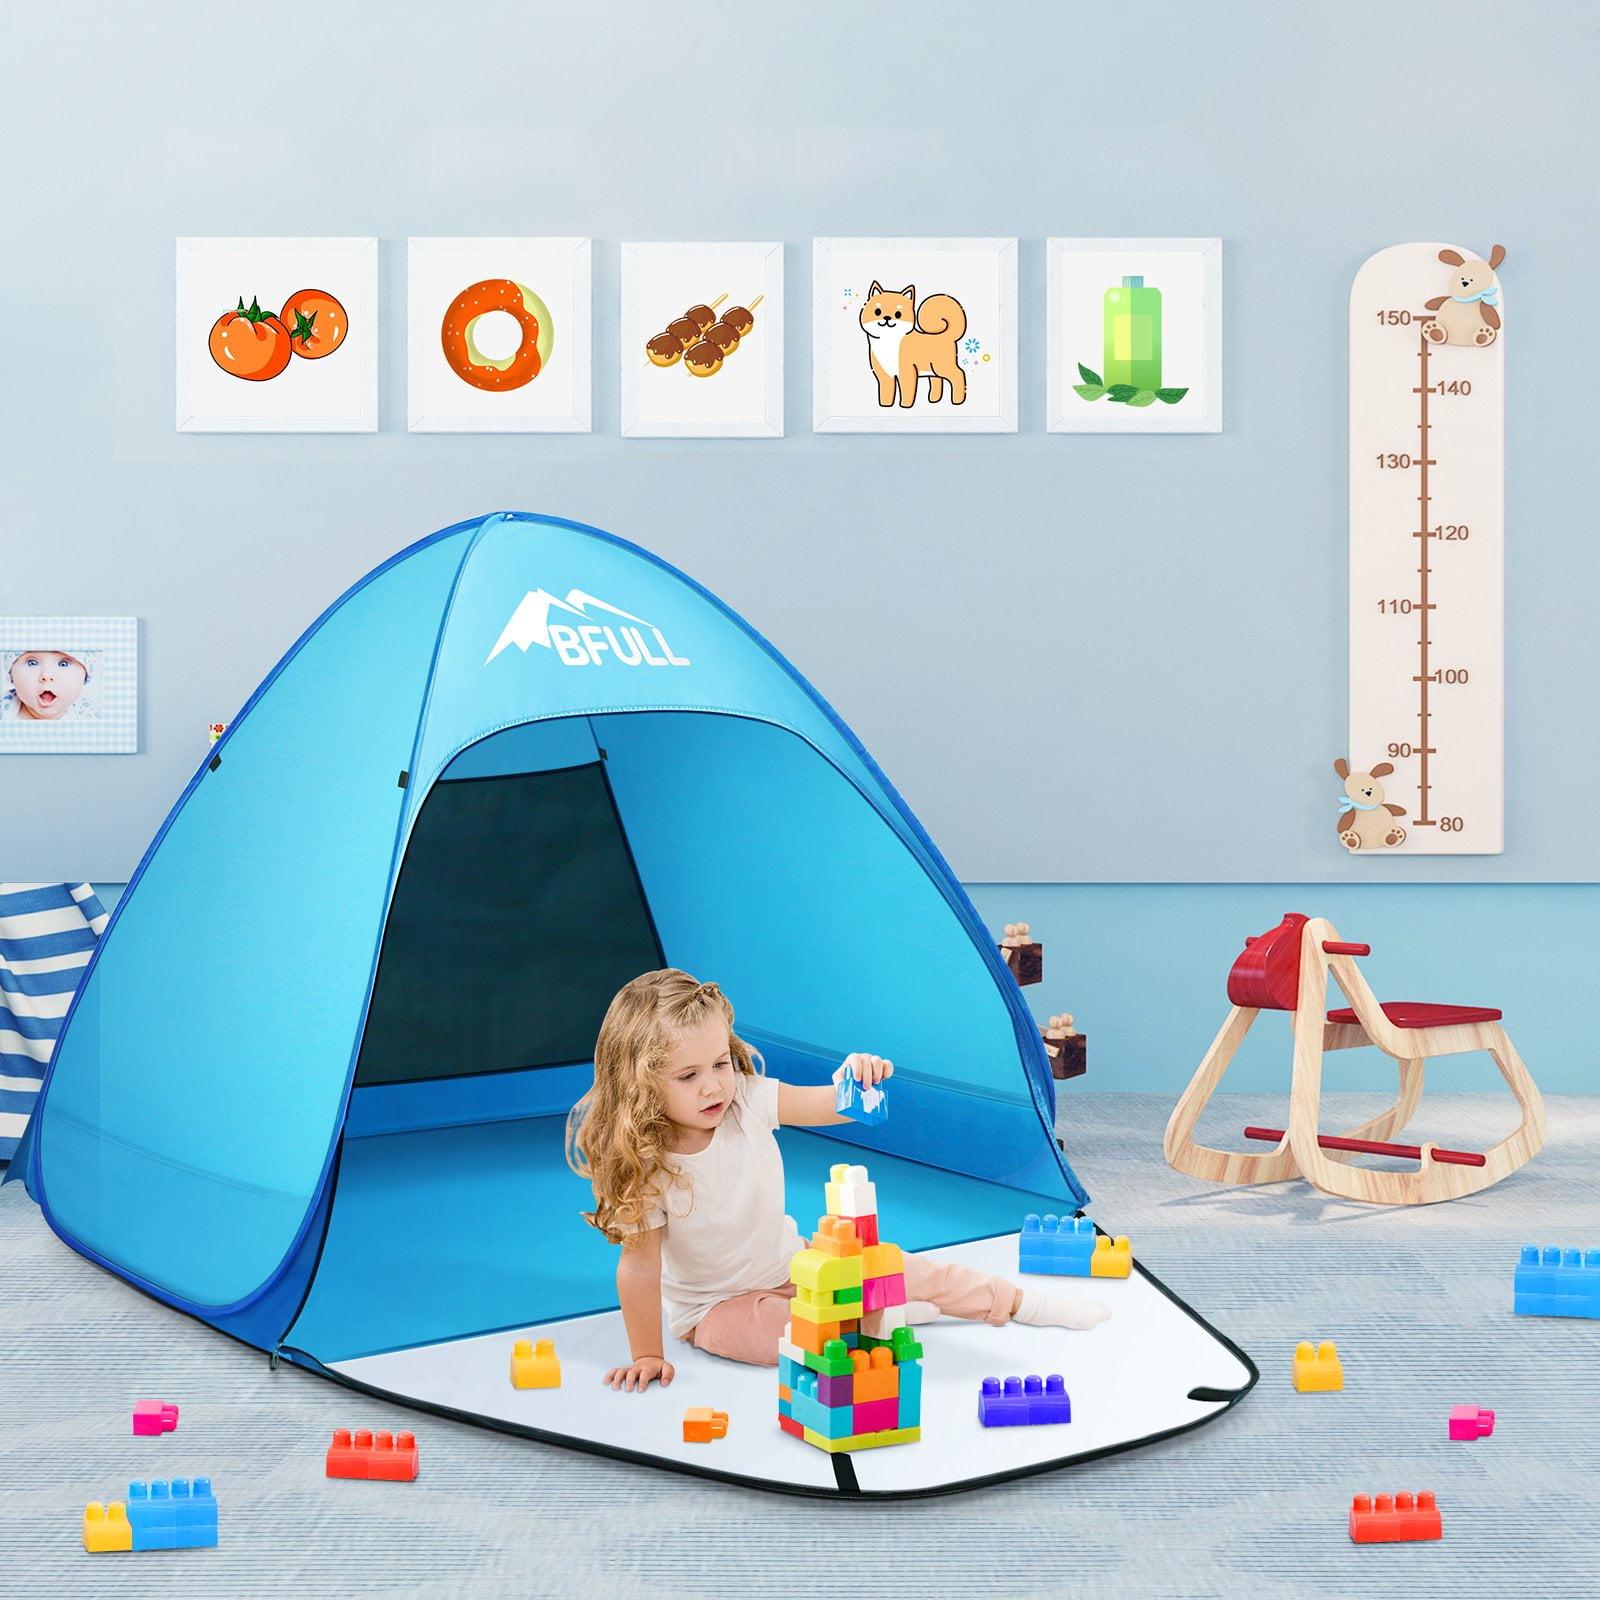 Blue BFULL Outdoor Automatic Pop up Beach Tent Portable Anti-UV Tent 